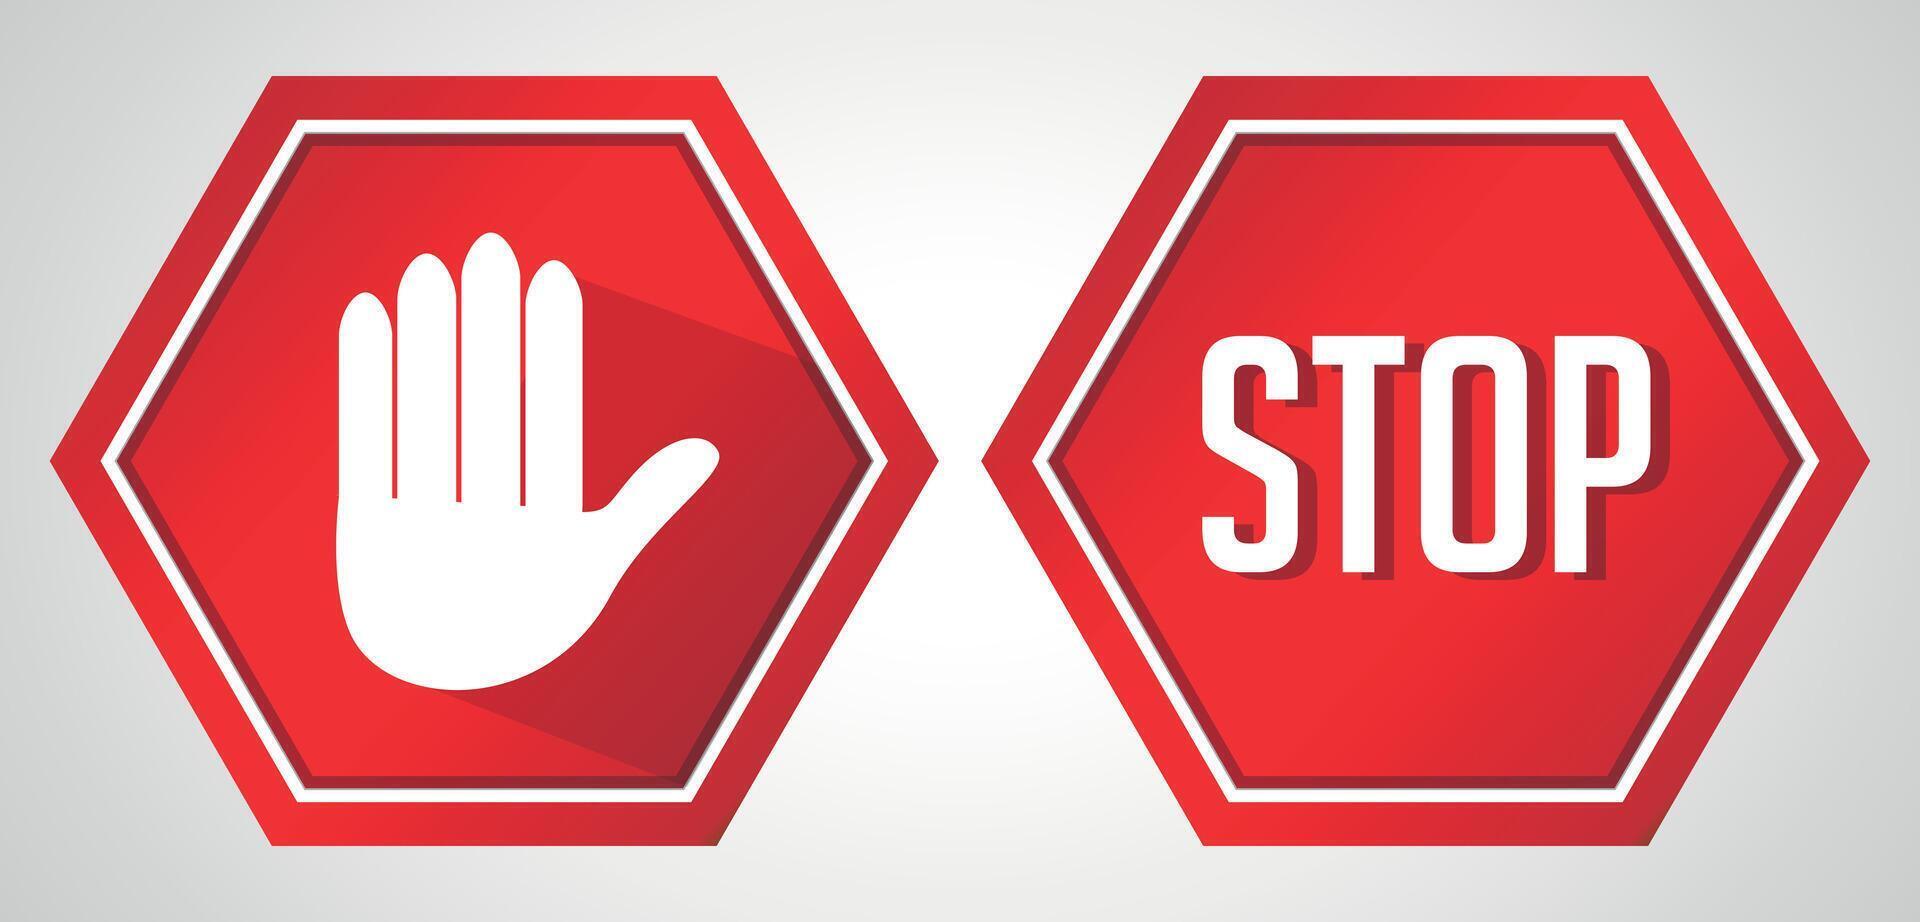 Set stop red sign icon with white hand, do not enter. Warning stop sign stock vector